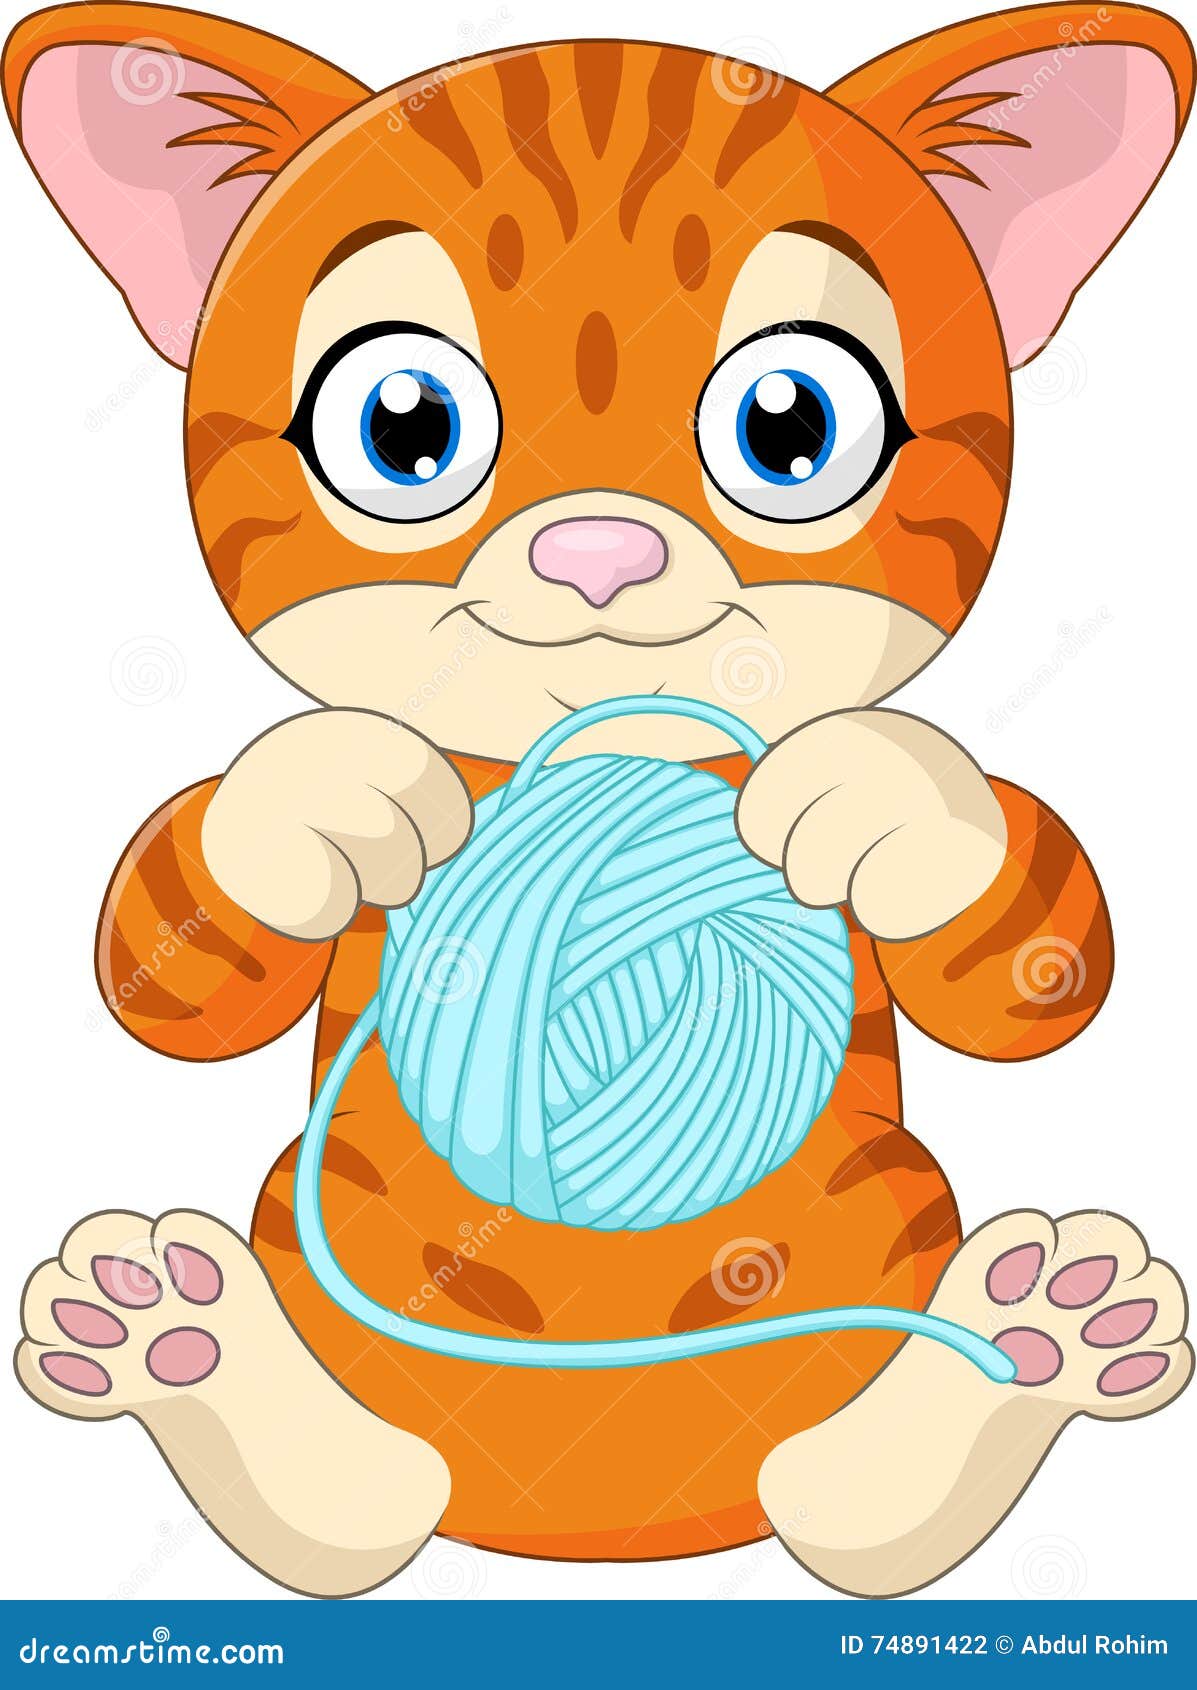 Cute Cat Cartoon Playing with Ball of Yarn Stock Vector - Illustration ...